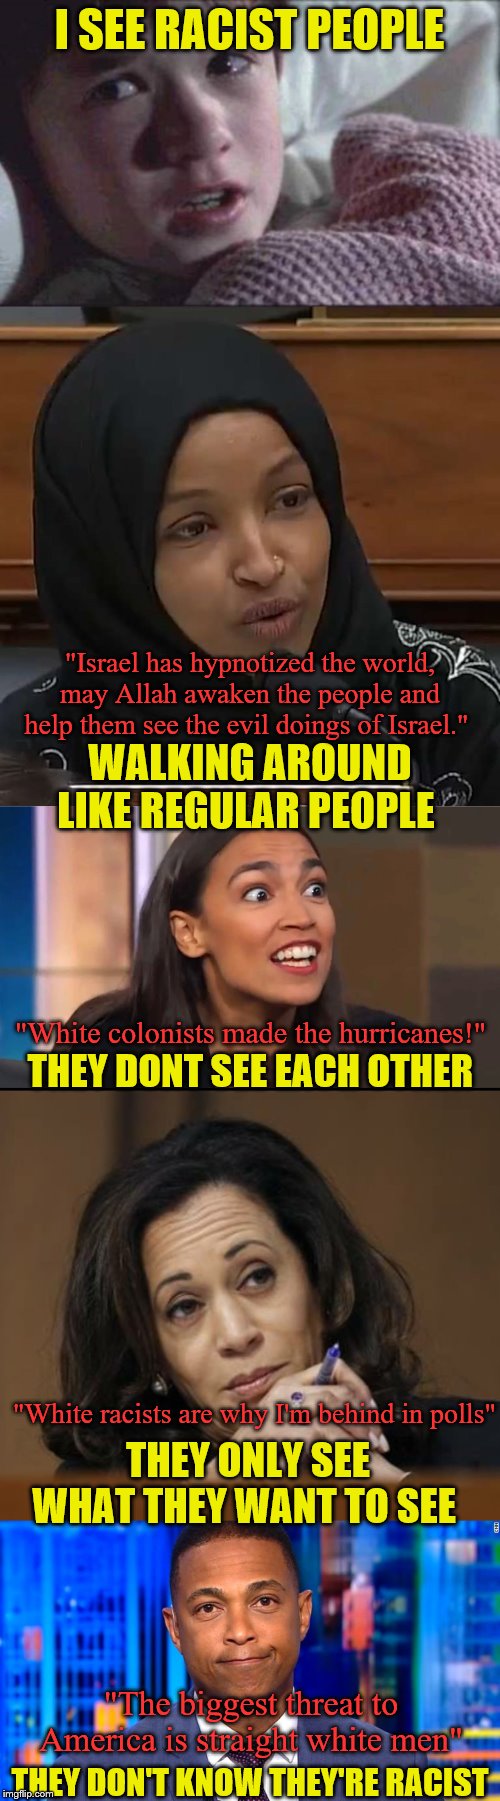 I'm ready to tell you my secret now | I SEE RACIST PEOPLE; "Israel has hypnotized the world, may Allah awaken the people and help them see the evil doings of Israel."; WALKING AROUND LIKE REGULAR PEOPLE; "White colonists made the hurricanes!"; THEY DONT SEE EACH OTHER; "White racists are why I'm behind in polls"; THEY ONLY SEE WHAT THEY WANT TO SEE; "The biggest threat to America is straight white men"; THEY DON'T KNOW THEY'RE RACIST | image tagged in memes,i see dead people,racists,political meme | made w/ Imgflip meme maker